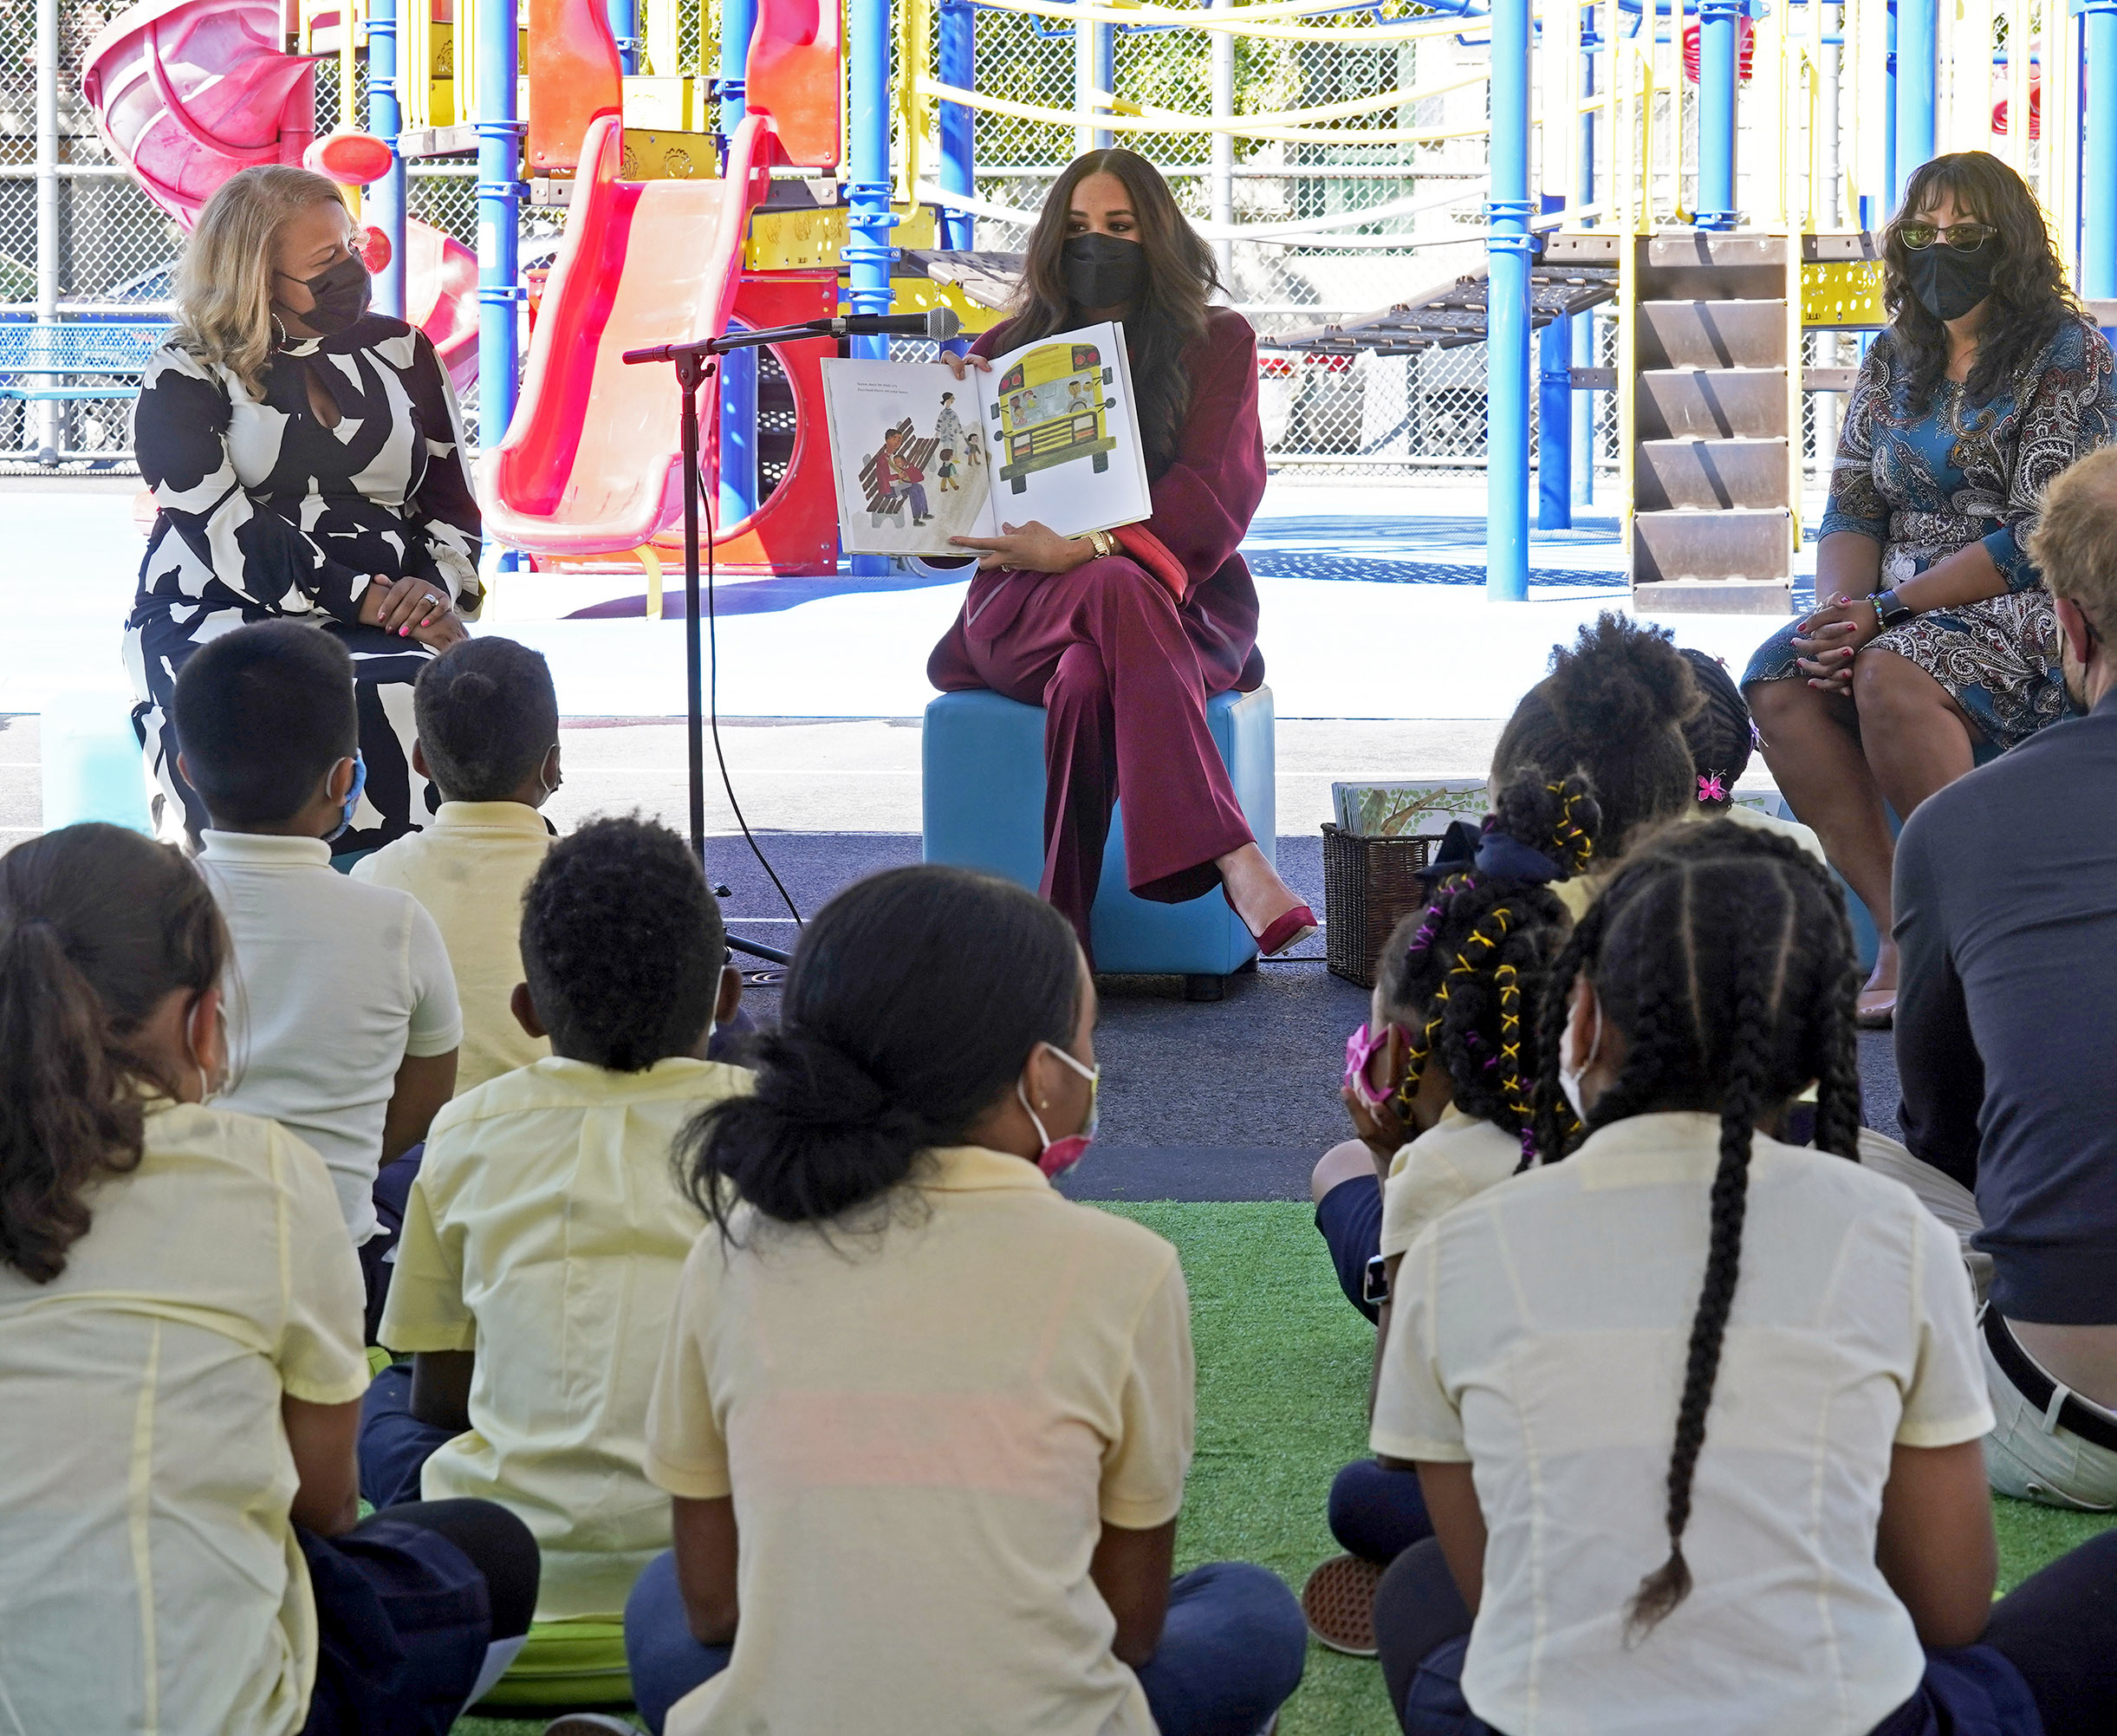 PHOTO: Meghan, the Duchess of Sussex reads from her book "The Bench," as Prince Harry, the Duke of Sussex listens along with second grade students during their visit to the Mahalia Jackson School, in New York's Harlem neighborhood, Sept. 24, 2021.